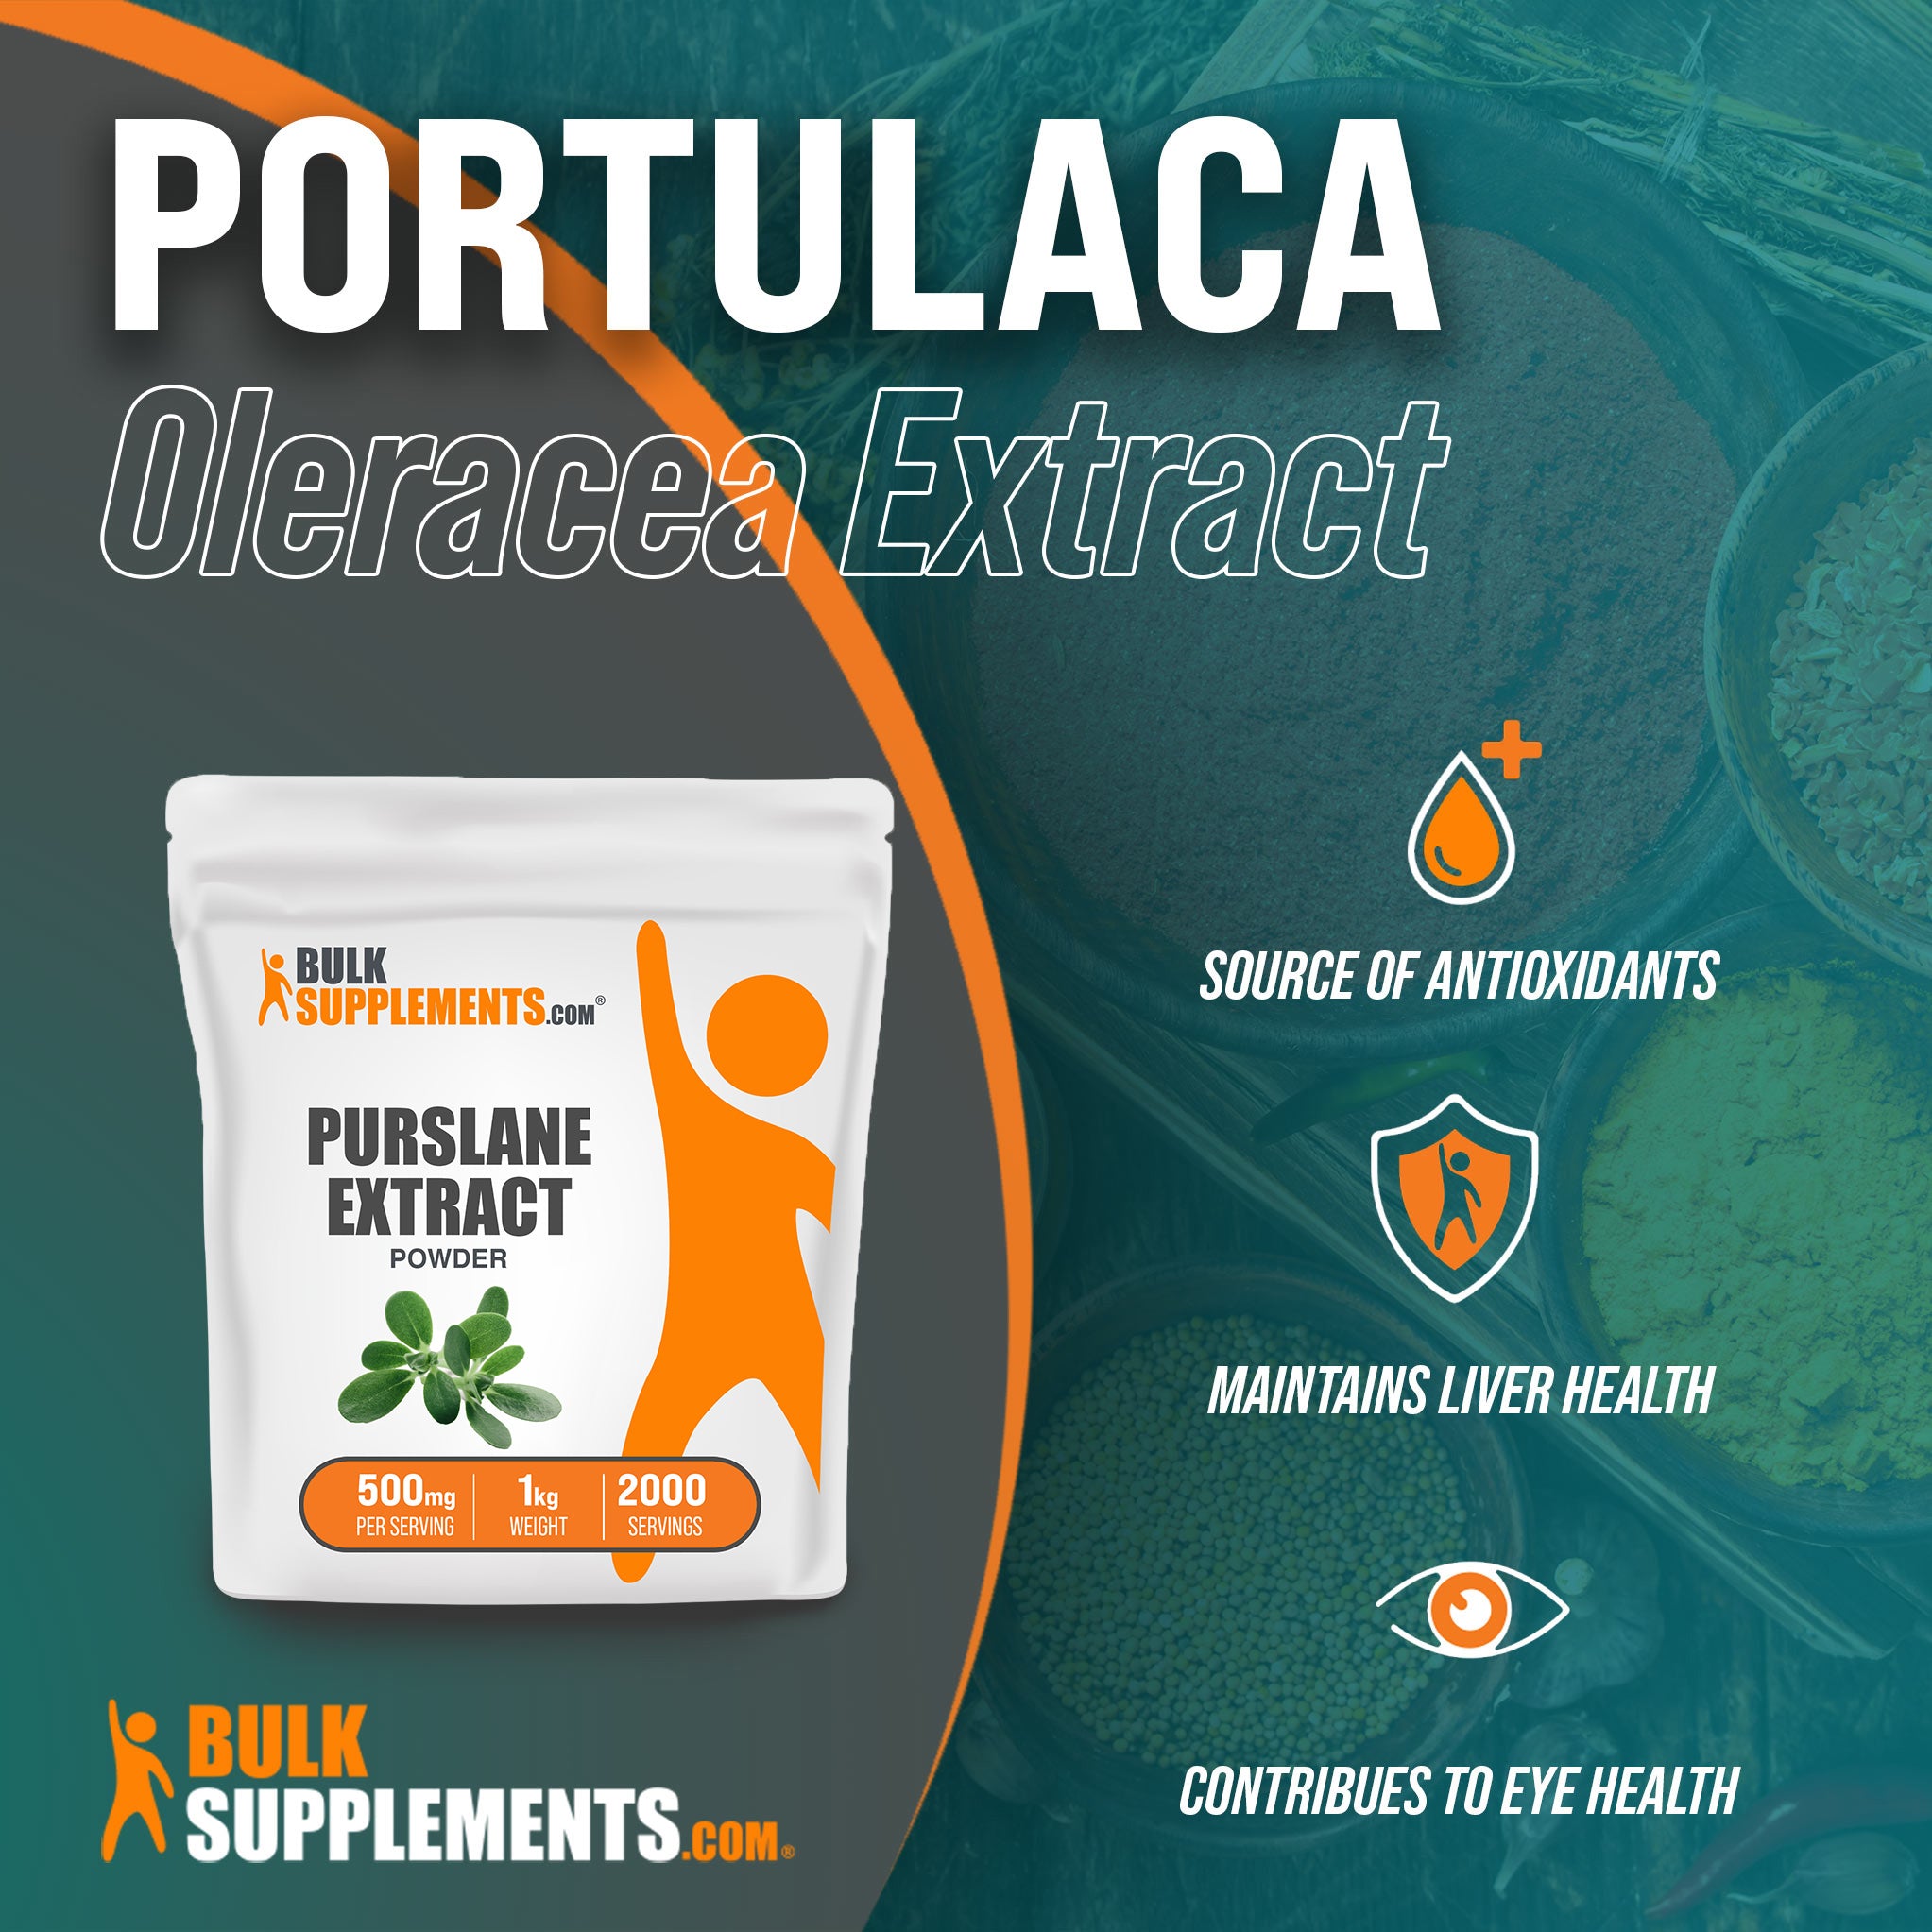 Benefits of Portulaca Oleracea Extract: source of antioxidants, maintains liver health, contributes to eye health